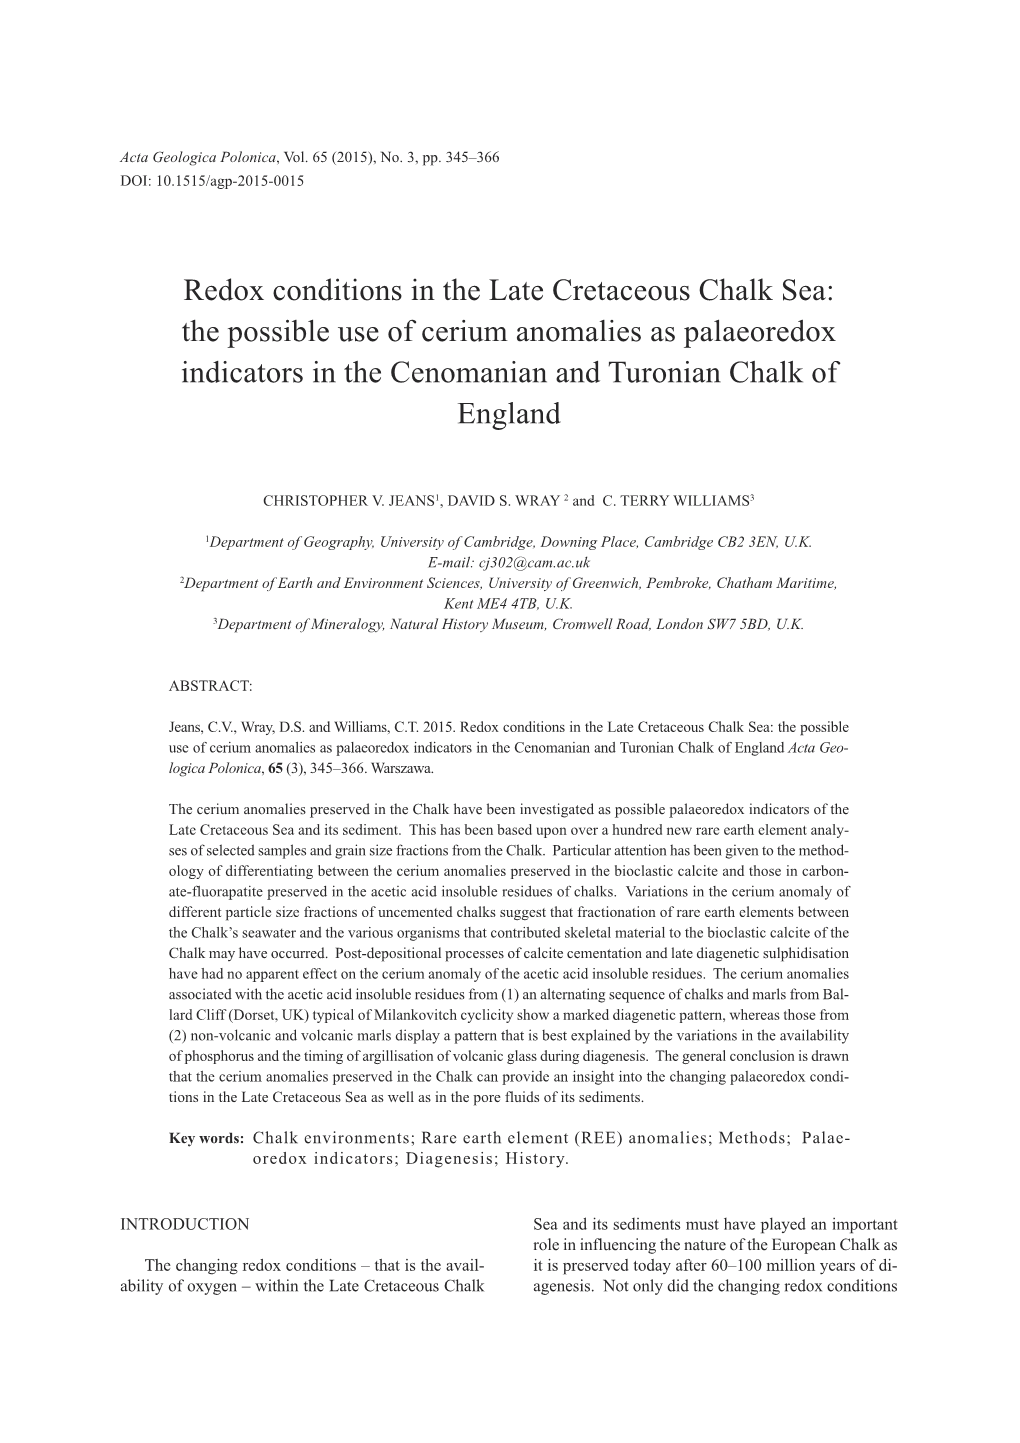 Redox Conditions in the Late Cretaceous Chalk Sea: the Possible Use of Cerium Anomalies As Palaeoredox Indicators in the Cenomanian and Turonian Chalk of England